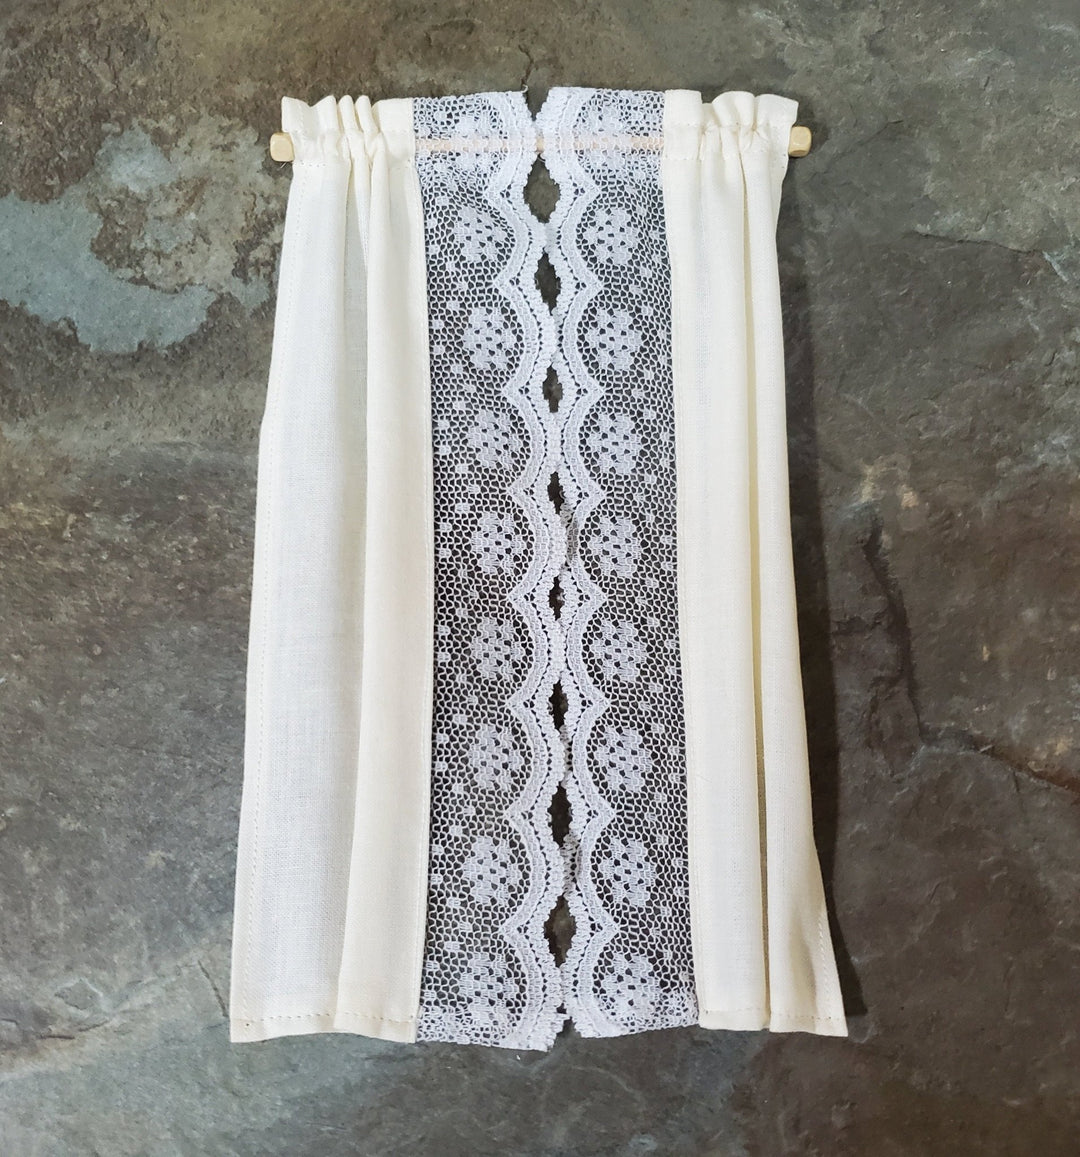 Dollhouse Curtains Fabric & Lace Cream and White Long 1:12 Scale Miniatures - Miniature Crush